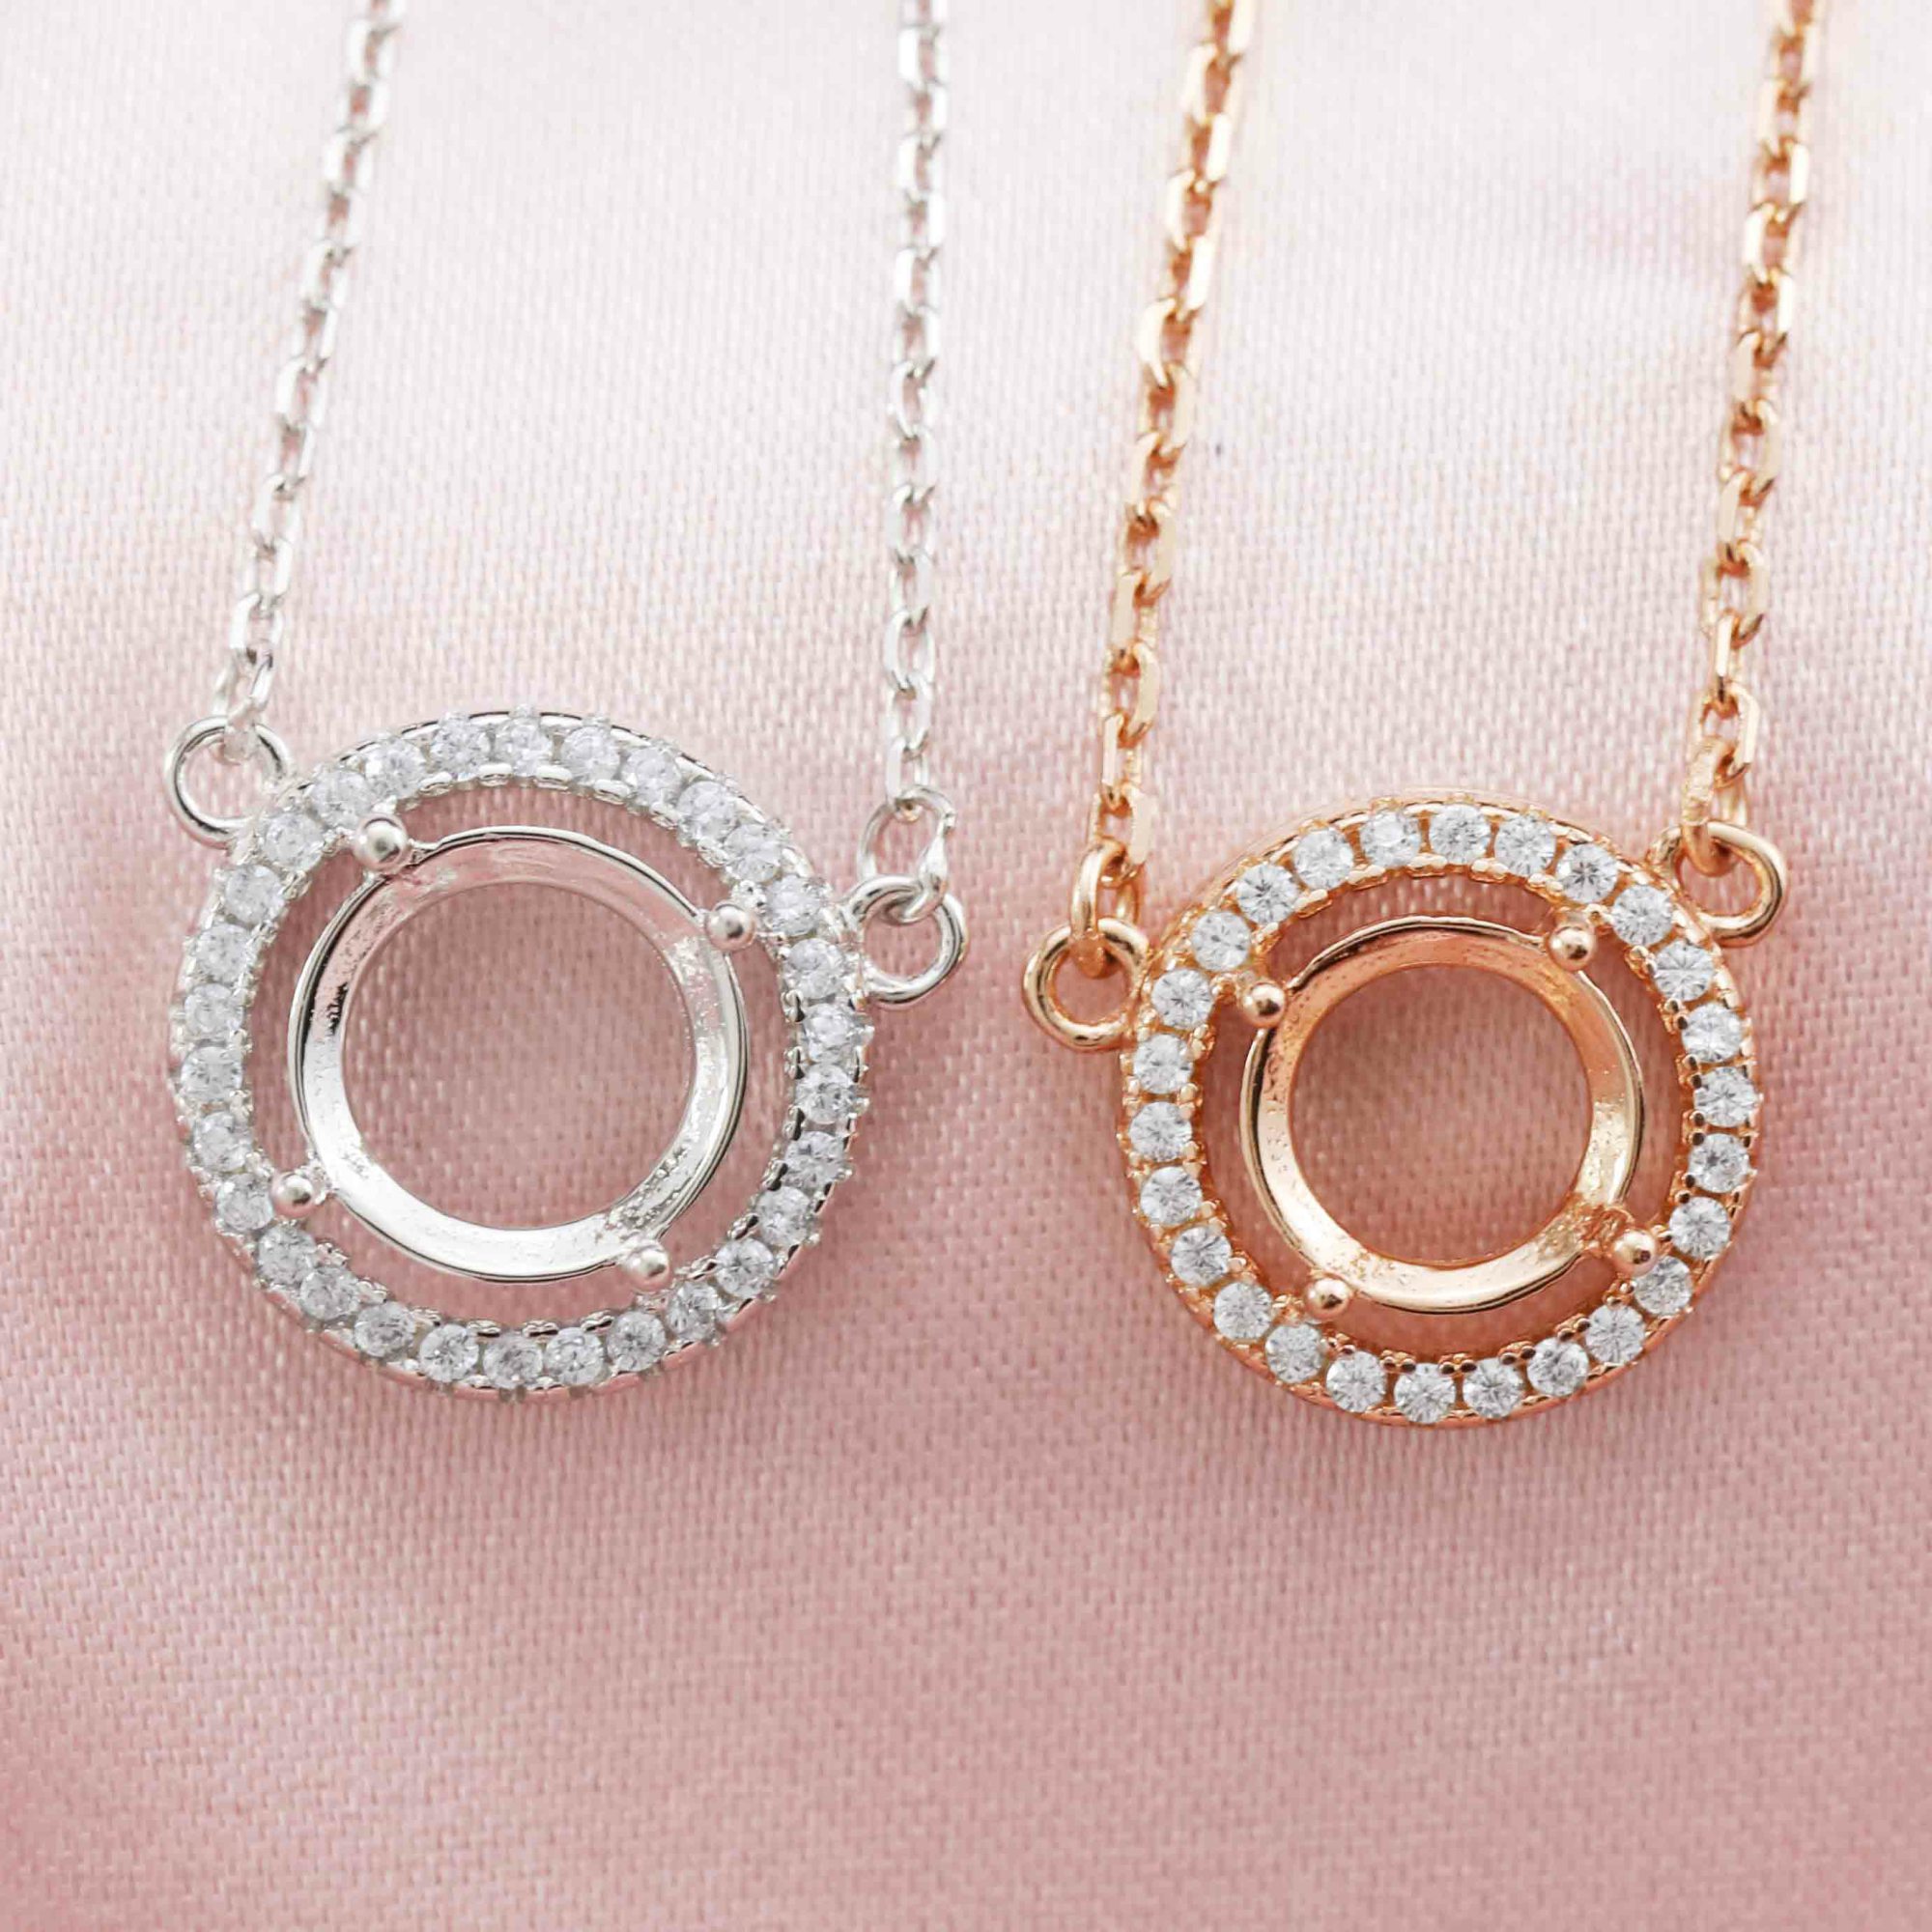 5-8MM Round Prong Pendant Settings Solid 14K/18K Gold Halo Keepsake Breast Milk Bezel with Birthstone Accents Necklace Chain DIY Memory Jewelry Supplies 1411215-1 - Click Image to Close